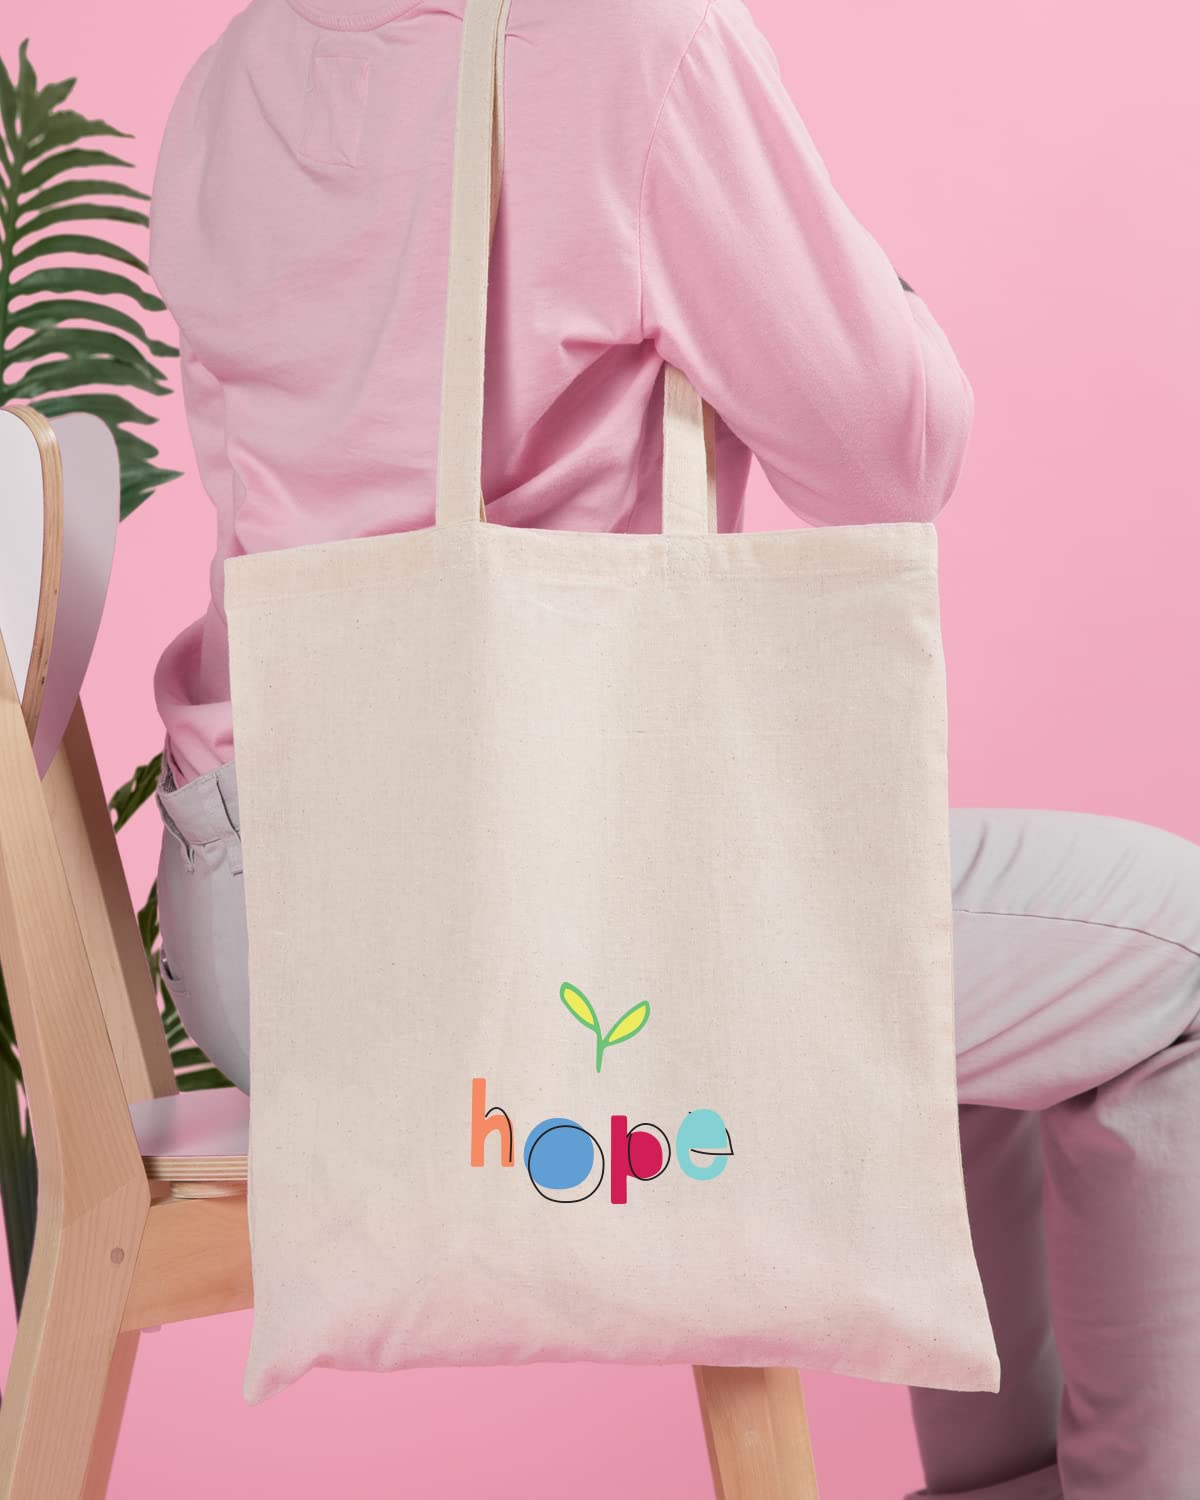 The Pink Magnet Hope Tote Bag - Canvas Tote Bag for Women | Printed Multipurpose Cotton Bags | Cute Hand Bag for Girls | Best for College, Travel, Grocery | Reusable Shopping Bag | Eco-Friendly Tote Bag